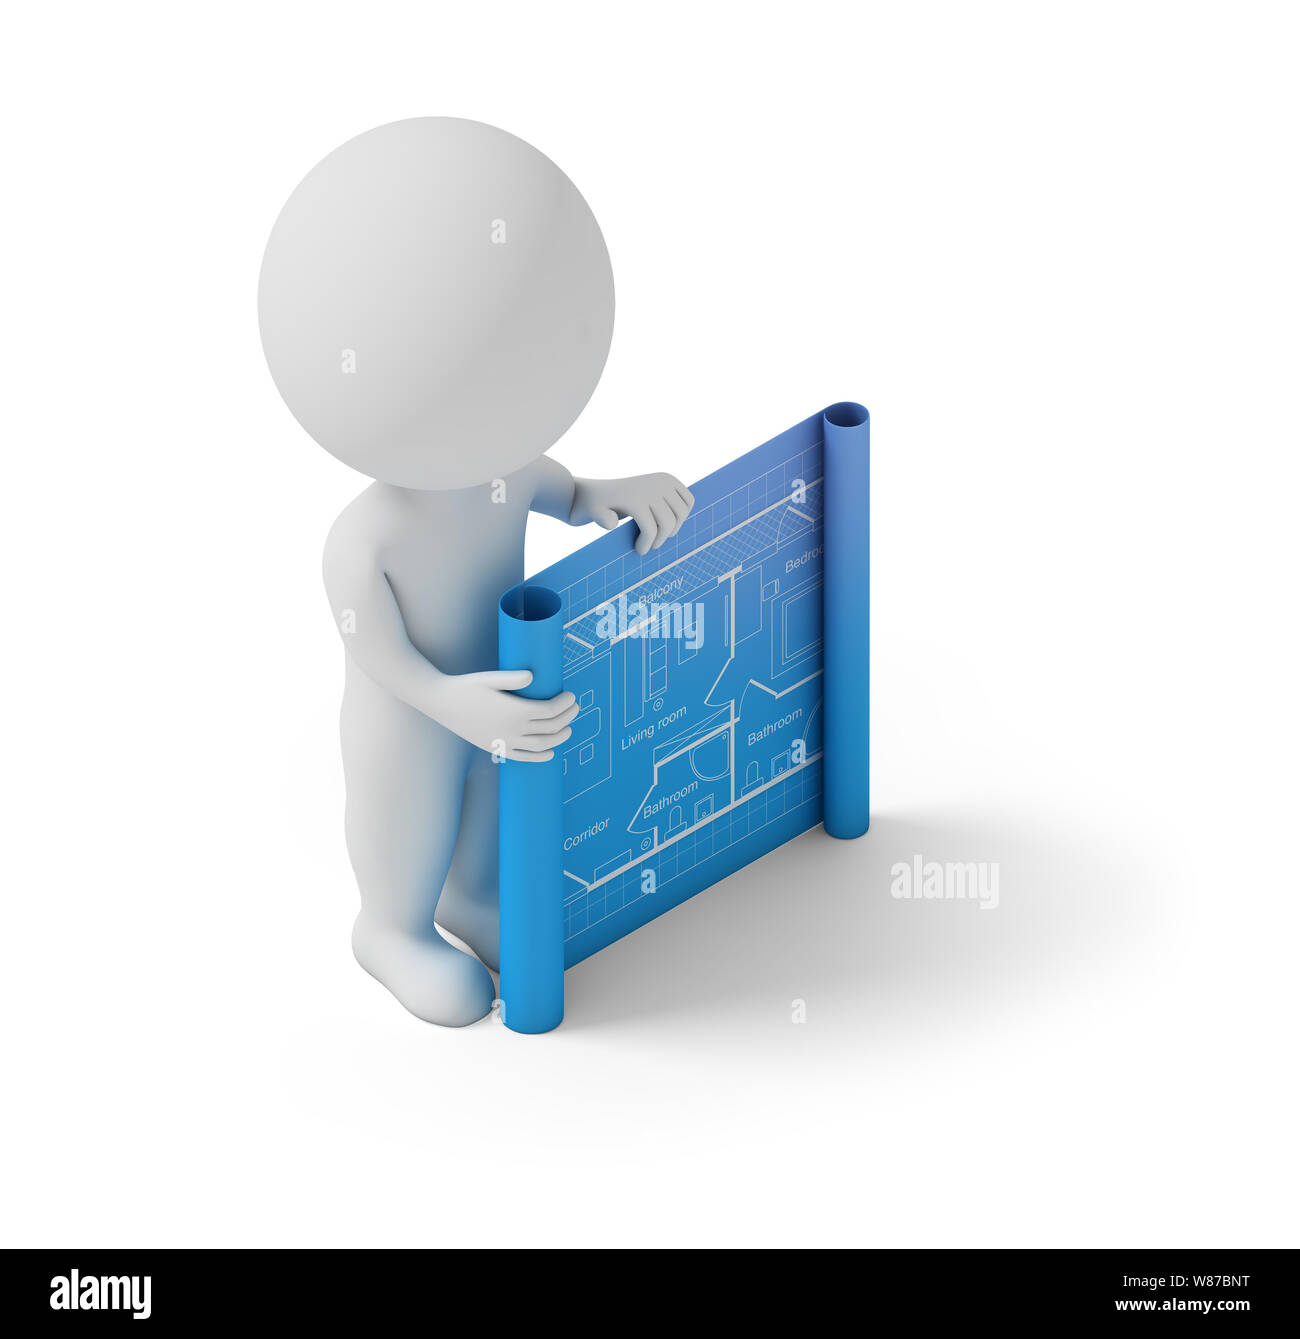 Isometric person with a blueprint. 3d image. White background. Stock Photo